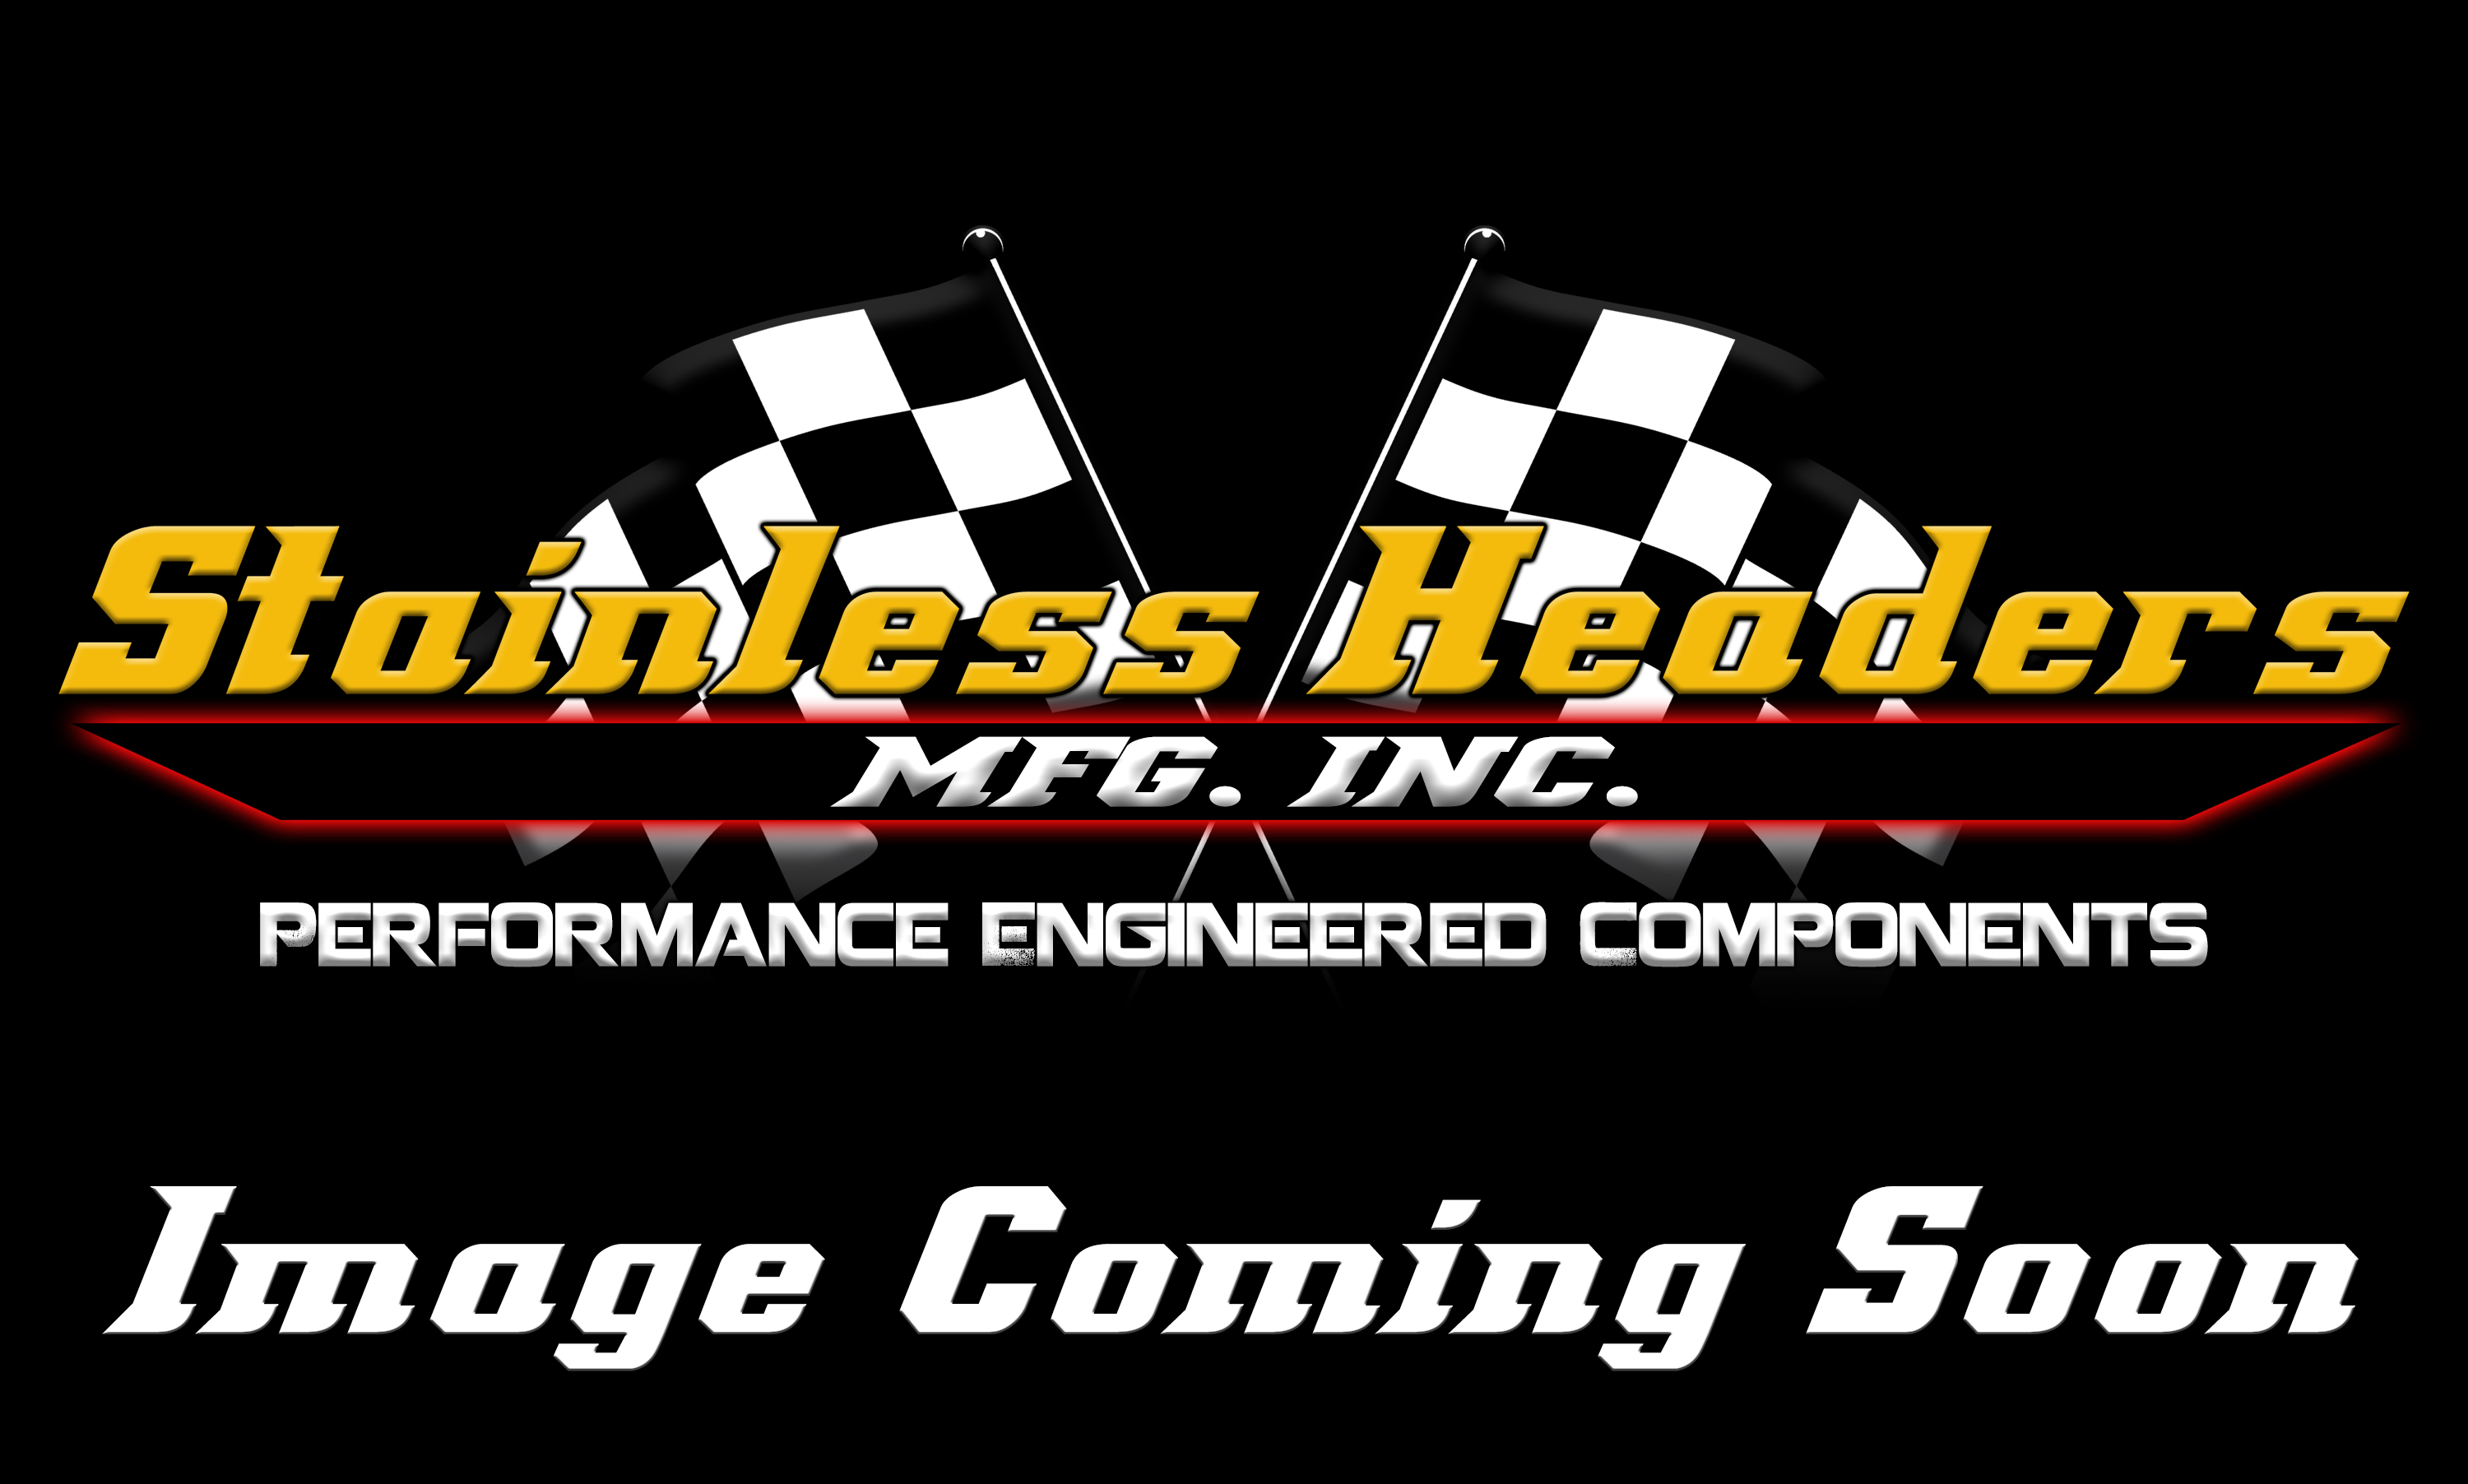 CompTurbo Technology Turbochargers - Comp Turbo Triple Ball Bearing Oil-Less 3.0 Turbochargers - CompTurbo Technologies - CTR3593S-6262 Reverse Rotation Oil-Less 3.0 Turbocharger (800 HP)